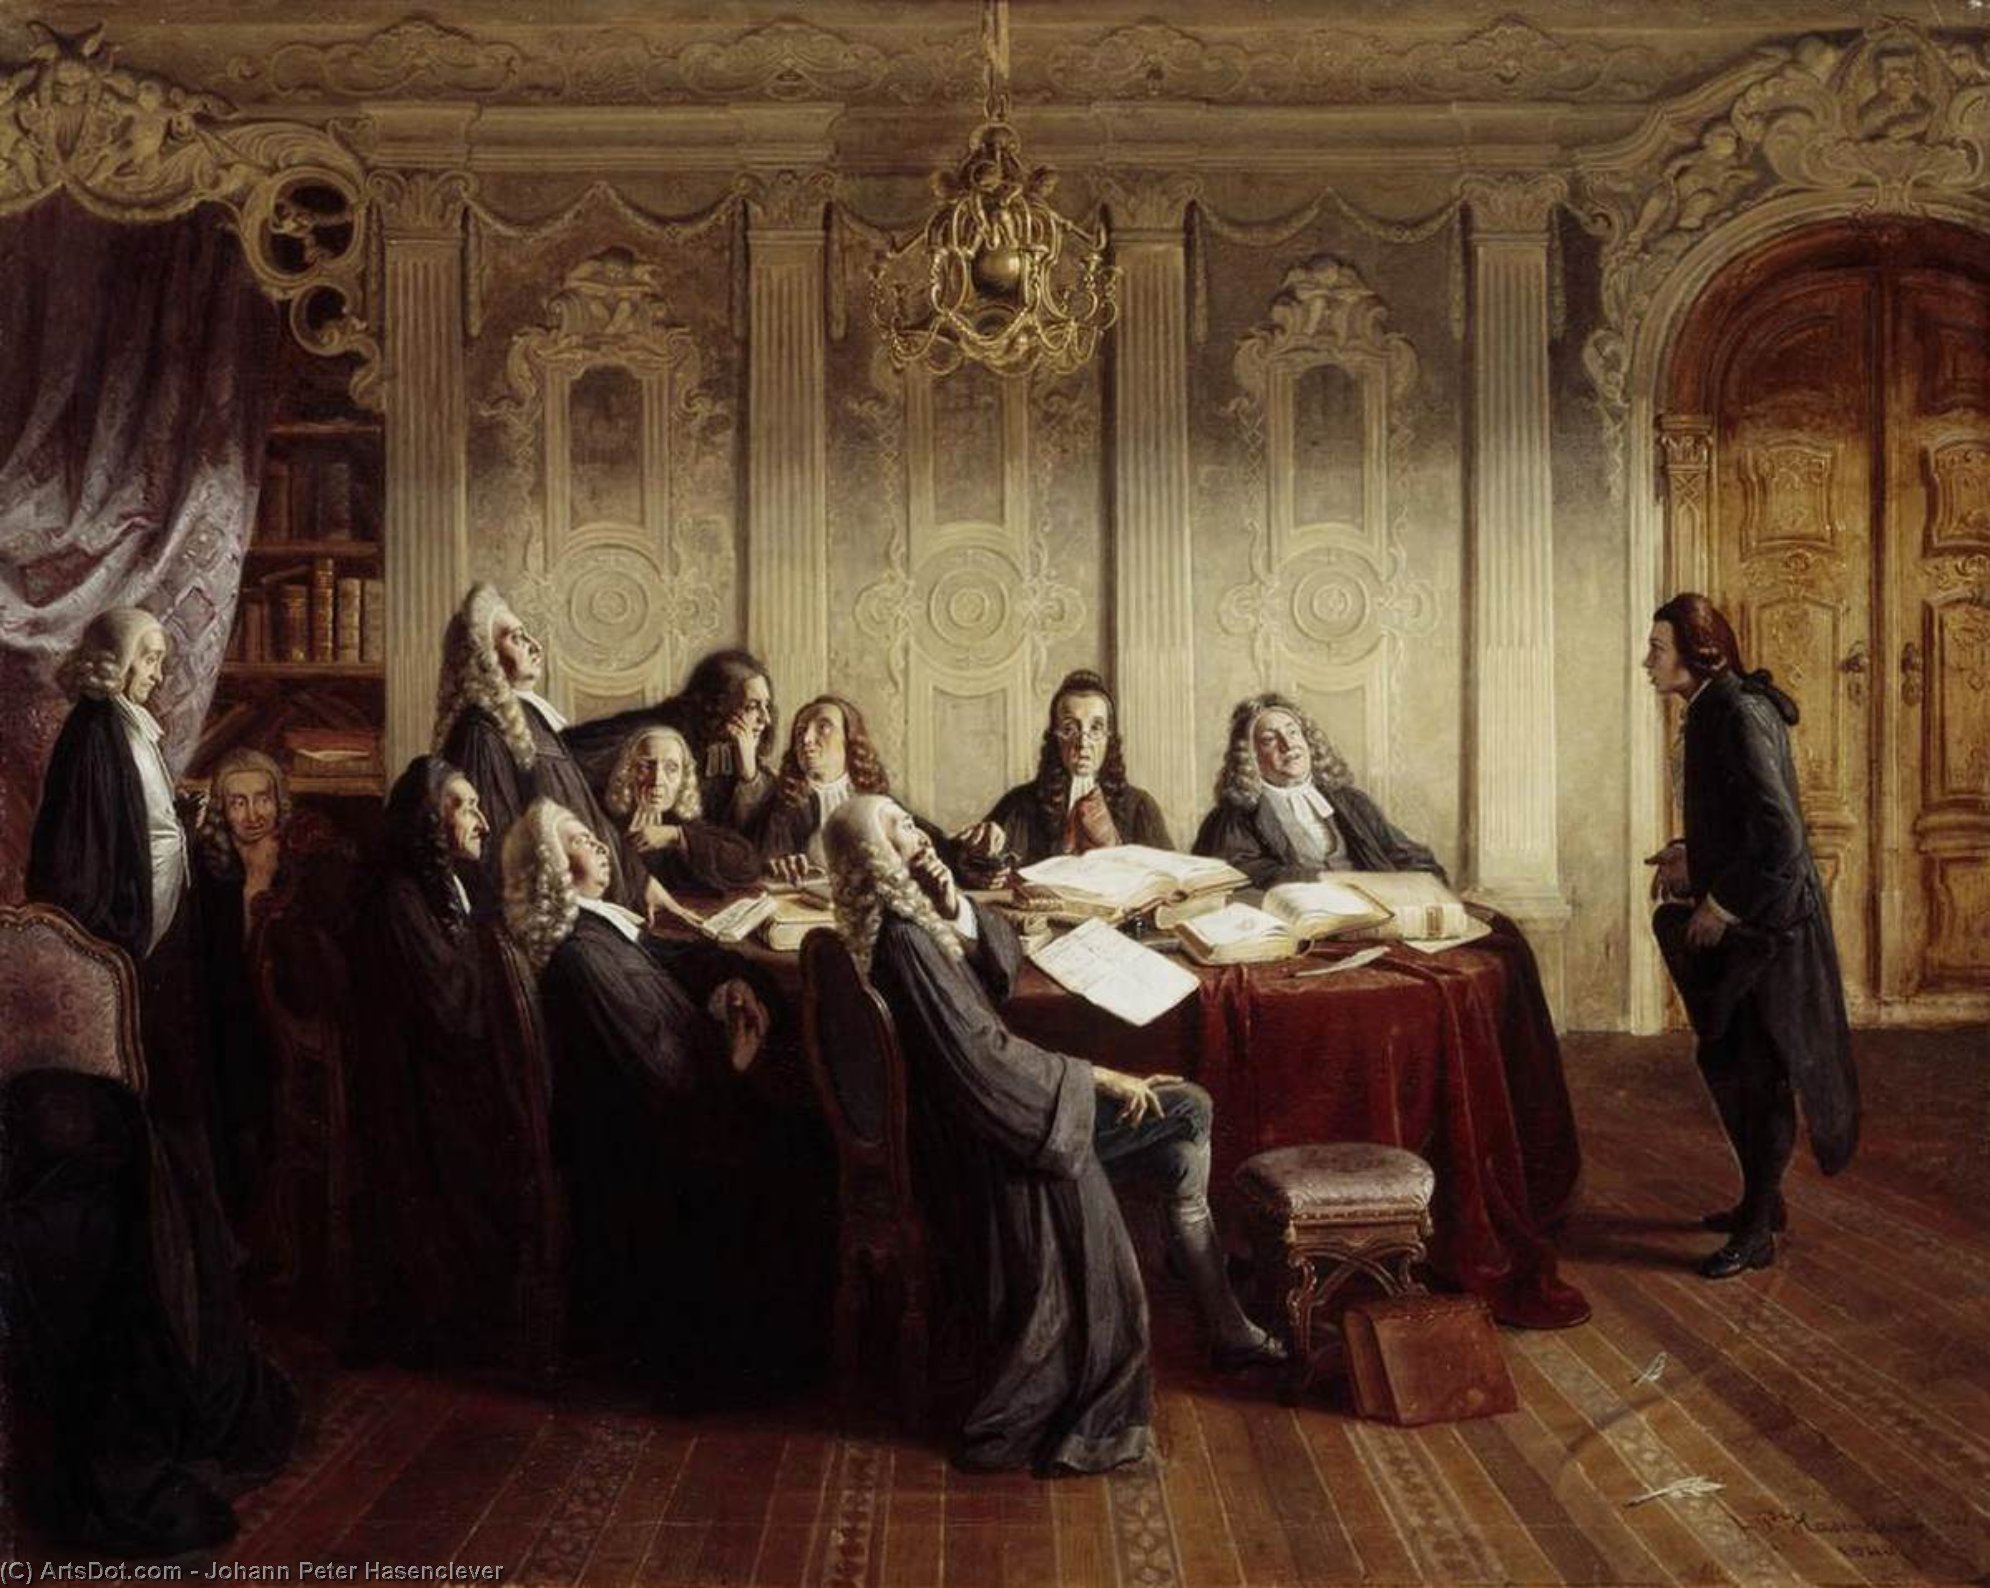 Order Oil Painting Replica Hieronymus Jobs at His Exam, 1840 by Johann Peter Hasenclever (1810-1853, Germany) | ArtsDot.com